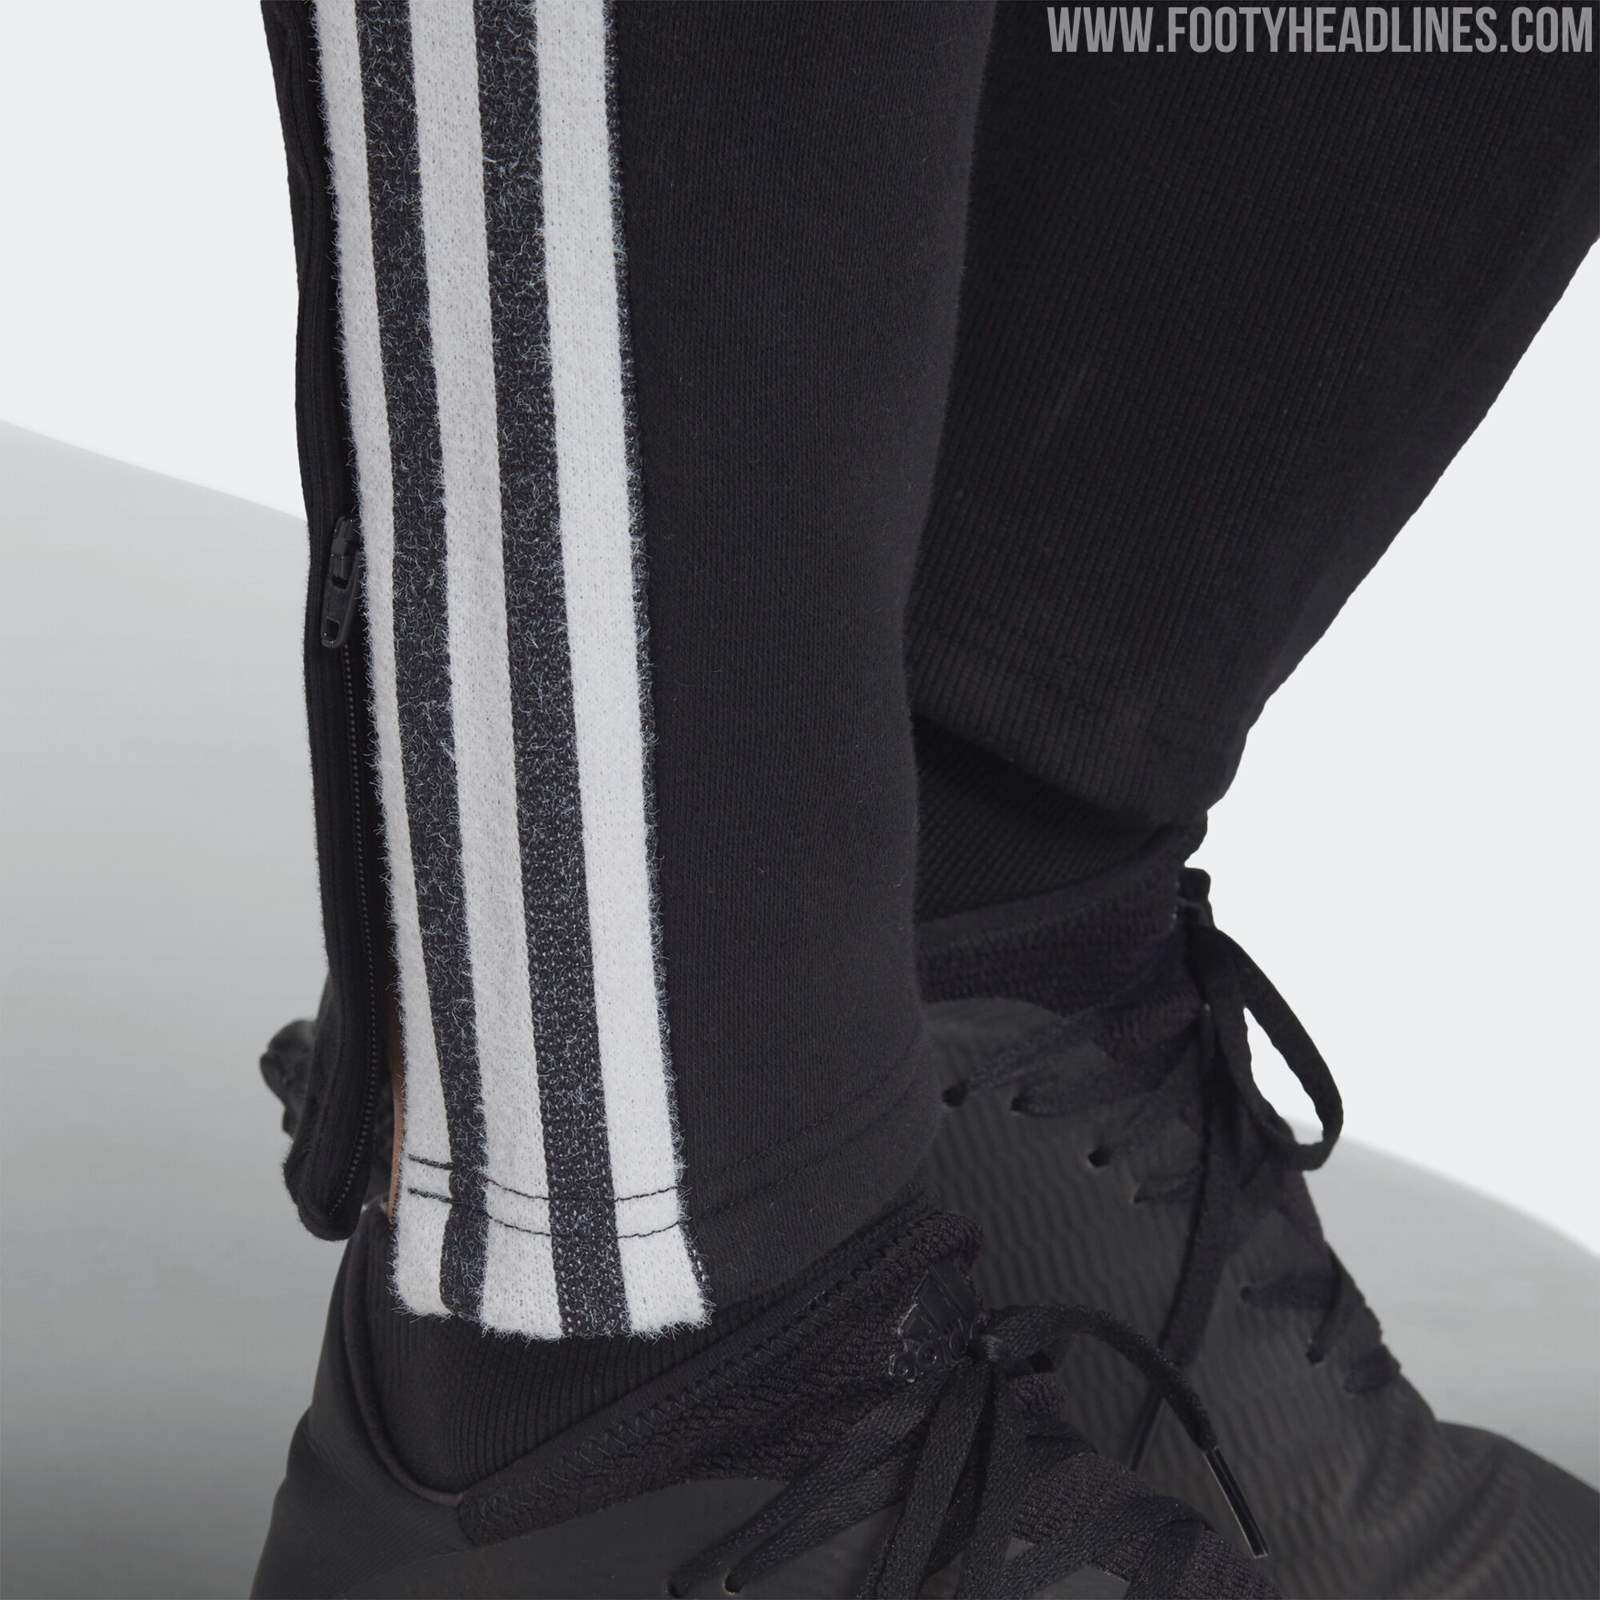 Adidas Germany EURO 2020 Off-Pitch Collection Released | Early 2000s ...